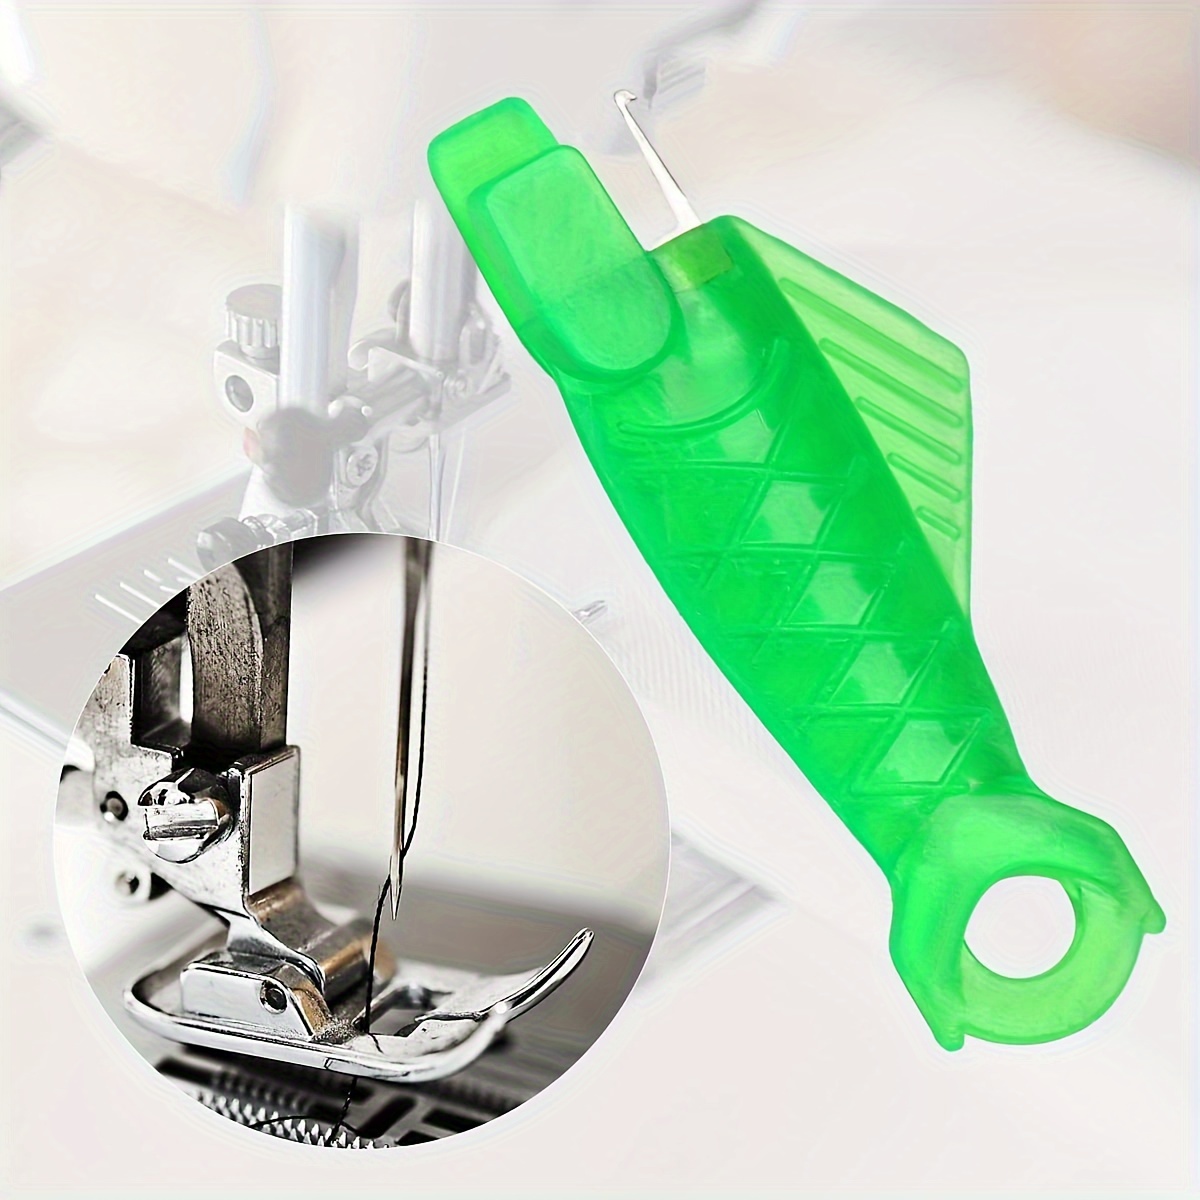 1pcs/3pcs, Automatic Needle Threaders, Simple Hand Tools For Easier Sewing  Household Needle Threader